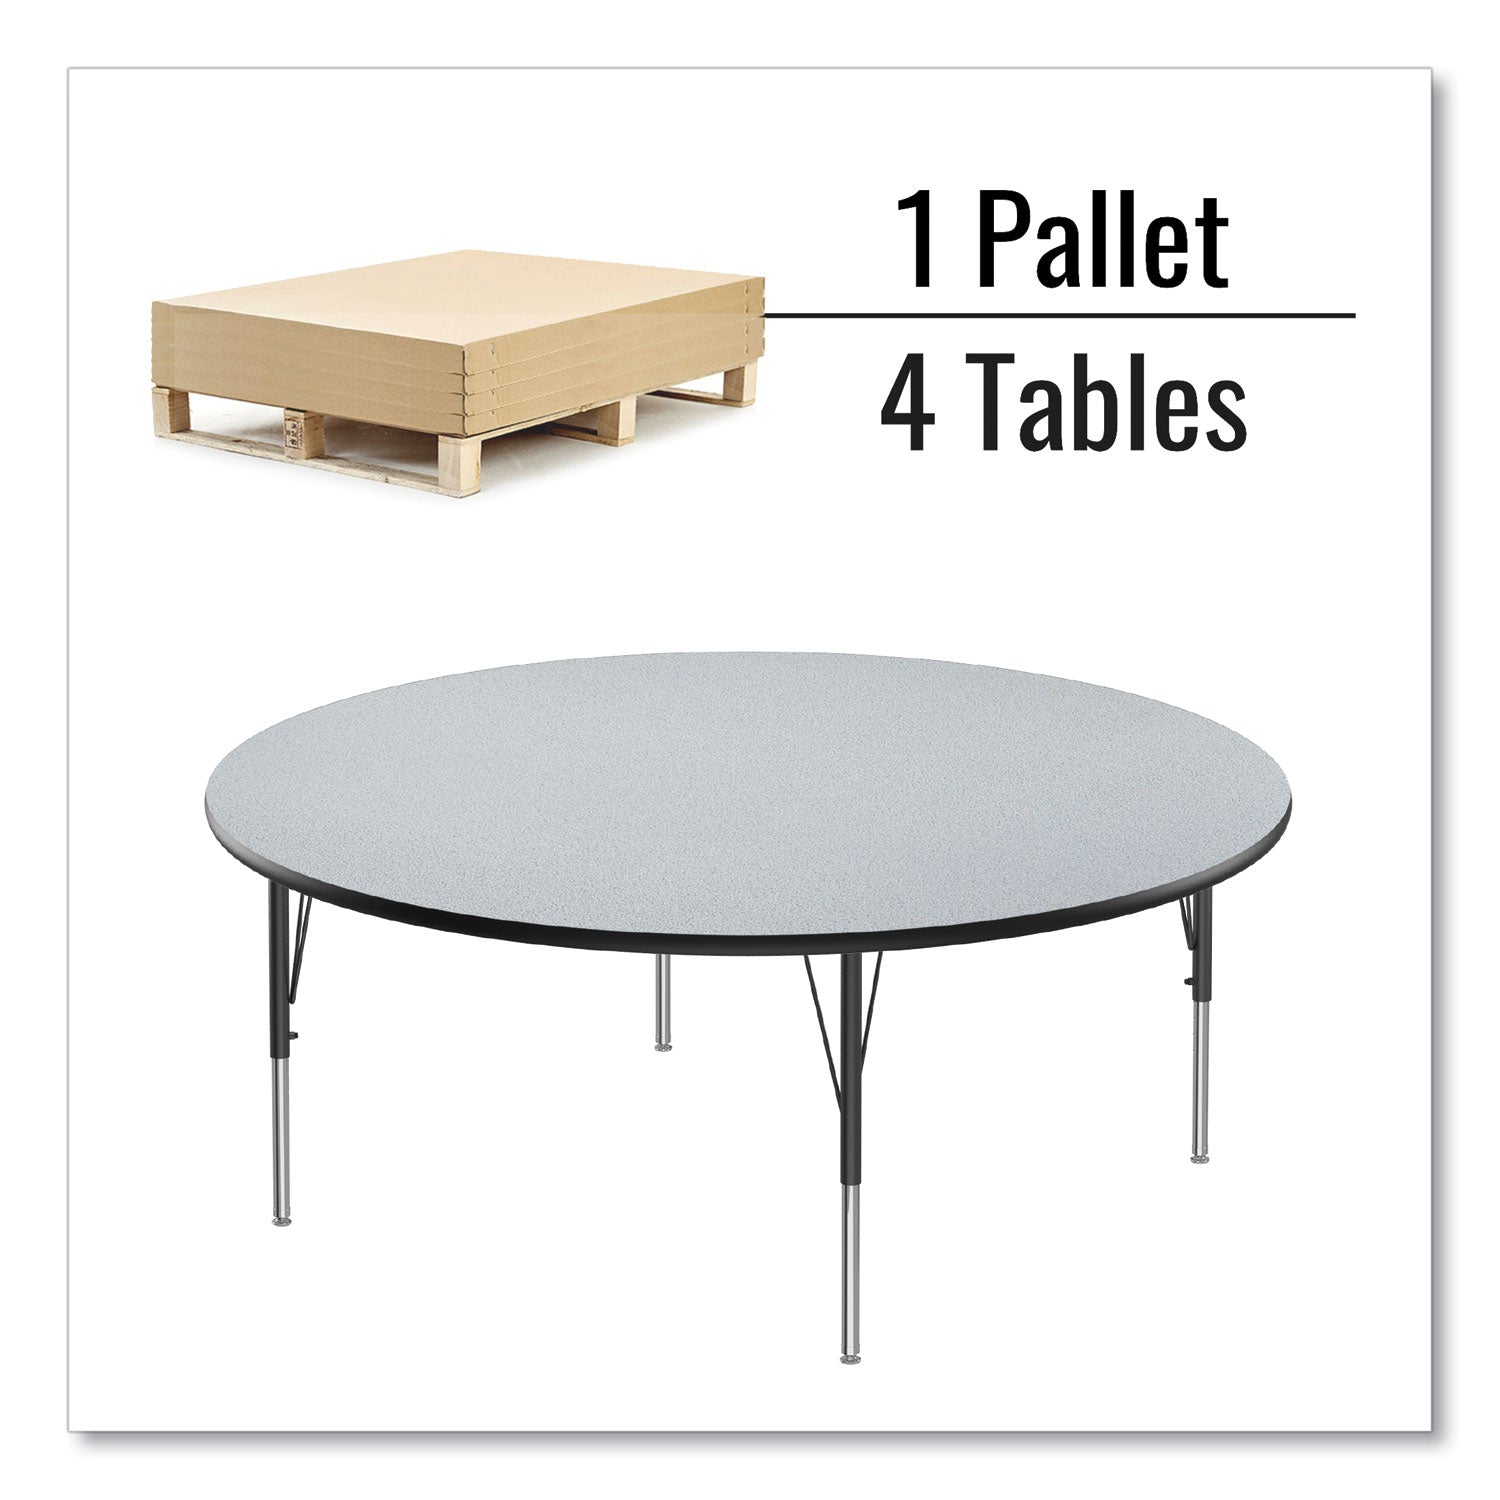 height-adjustable-activity-table-round-60-x-19-to-29-gray-granite-top-black-legs-4-pallet-ships-in-4-6-business-days_crl60tfrd1595k4 - 2